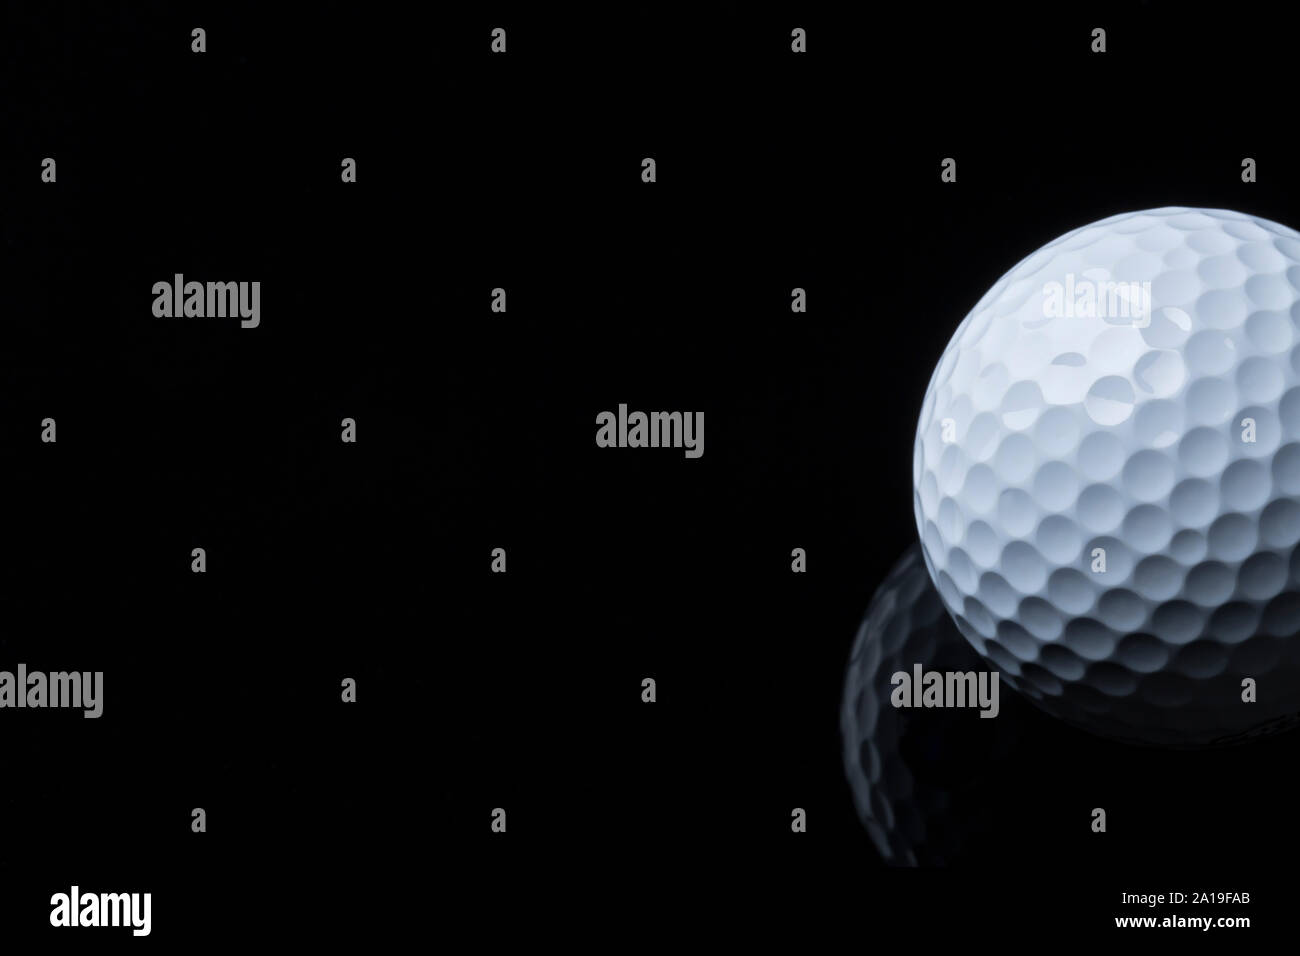 Golf ball isolated on dark background with space for text. Stock Photo